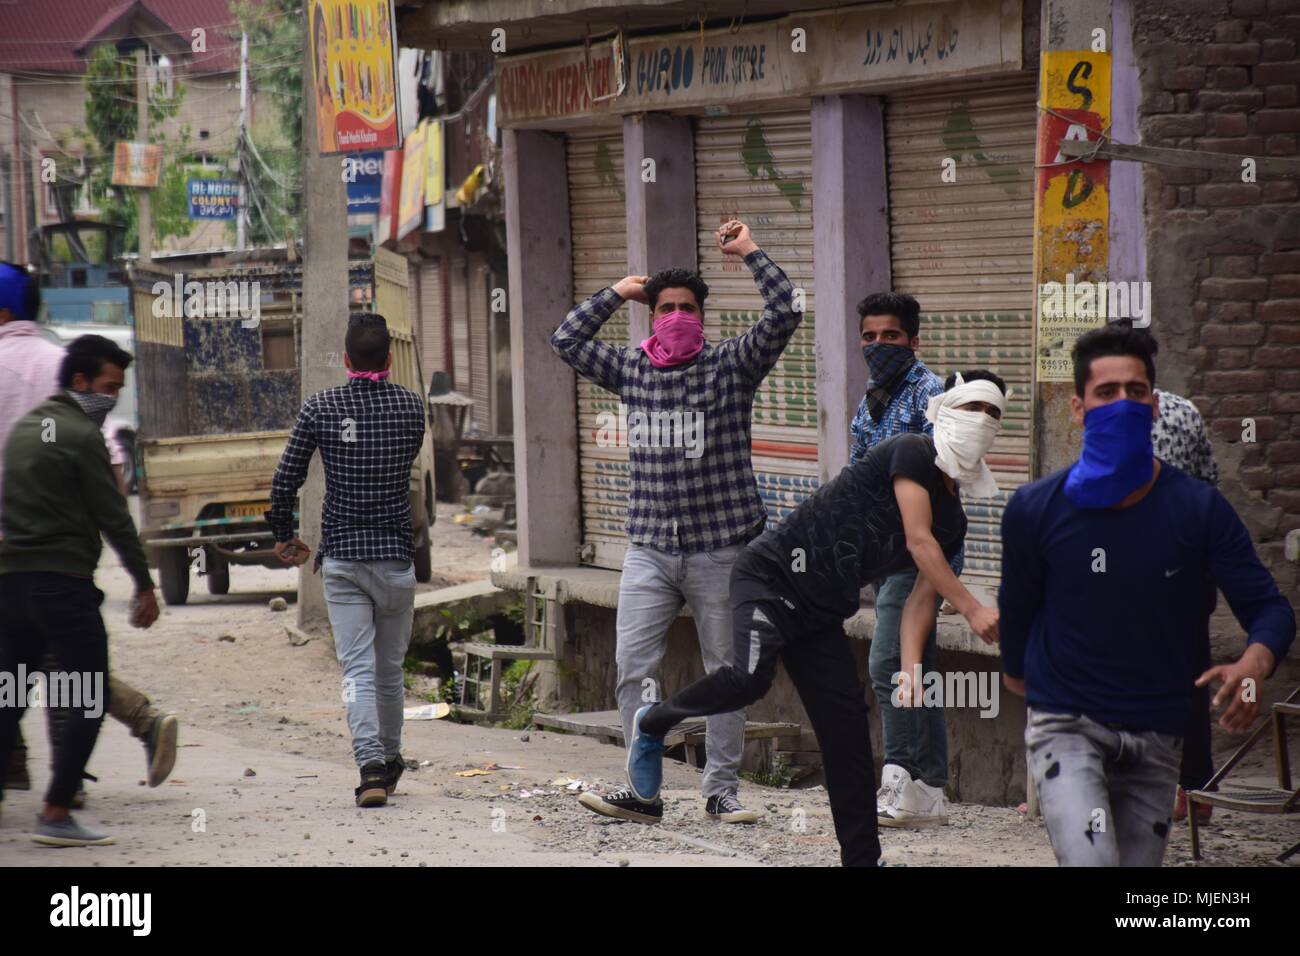 May 5, 2018 - Srinagar, Jammu & Kashmir, India - People clashes with forces near the Encounter site in Srinagar.4 Killed and several injured in an encounter between Indian forces and militants at chatabal area of Srinagar summer capital of Indian Kashmir on Saturday. Three militants were killed during a brief shootout after government forces laid seige around densely populated chatabal area of Srinagar. A young man also died after he was hit by the armoured vehicle during the clashes between the residents and police force as residents tried to help the Militants in escape. (Credit Image: © Ab Stock Photo